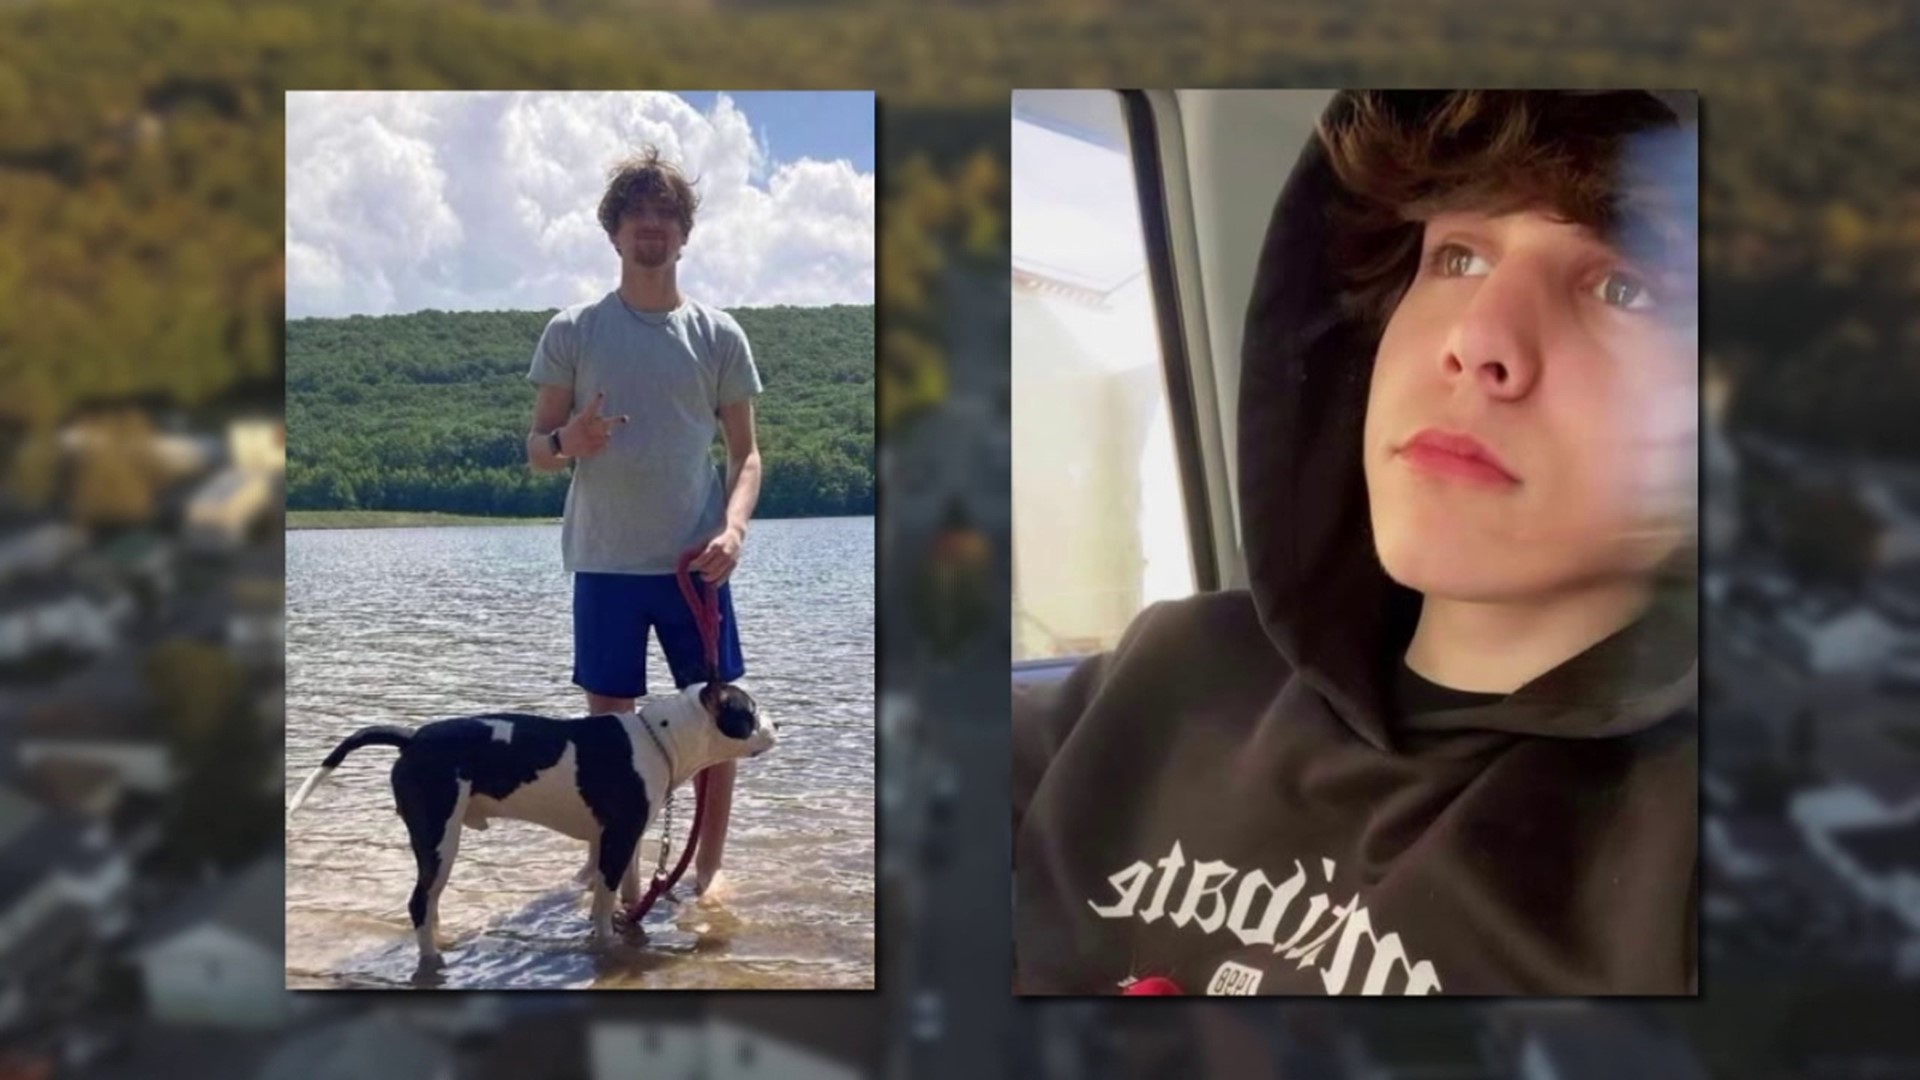 Newswatch 16's Jack Culkin spoke with the mothers of Hunter Mock and Angelito Caraballo, two young men who they say were taken far too soon.